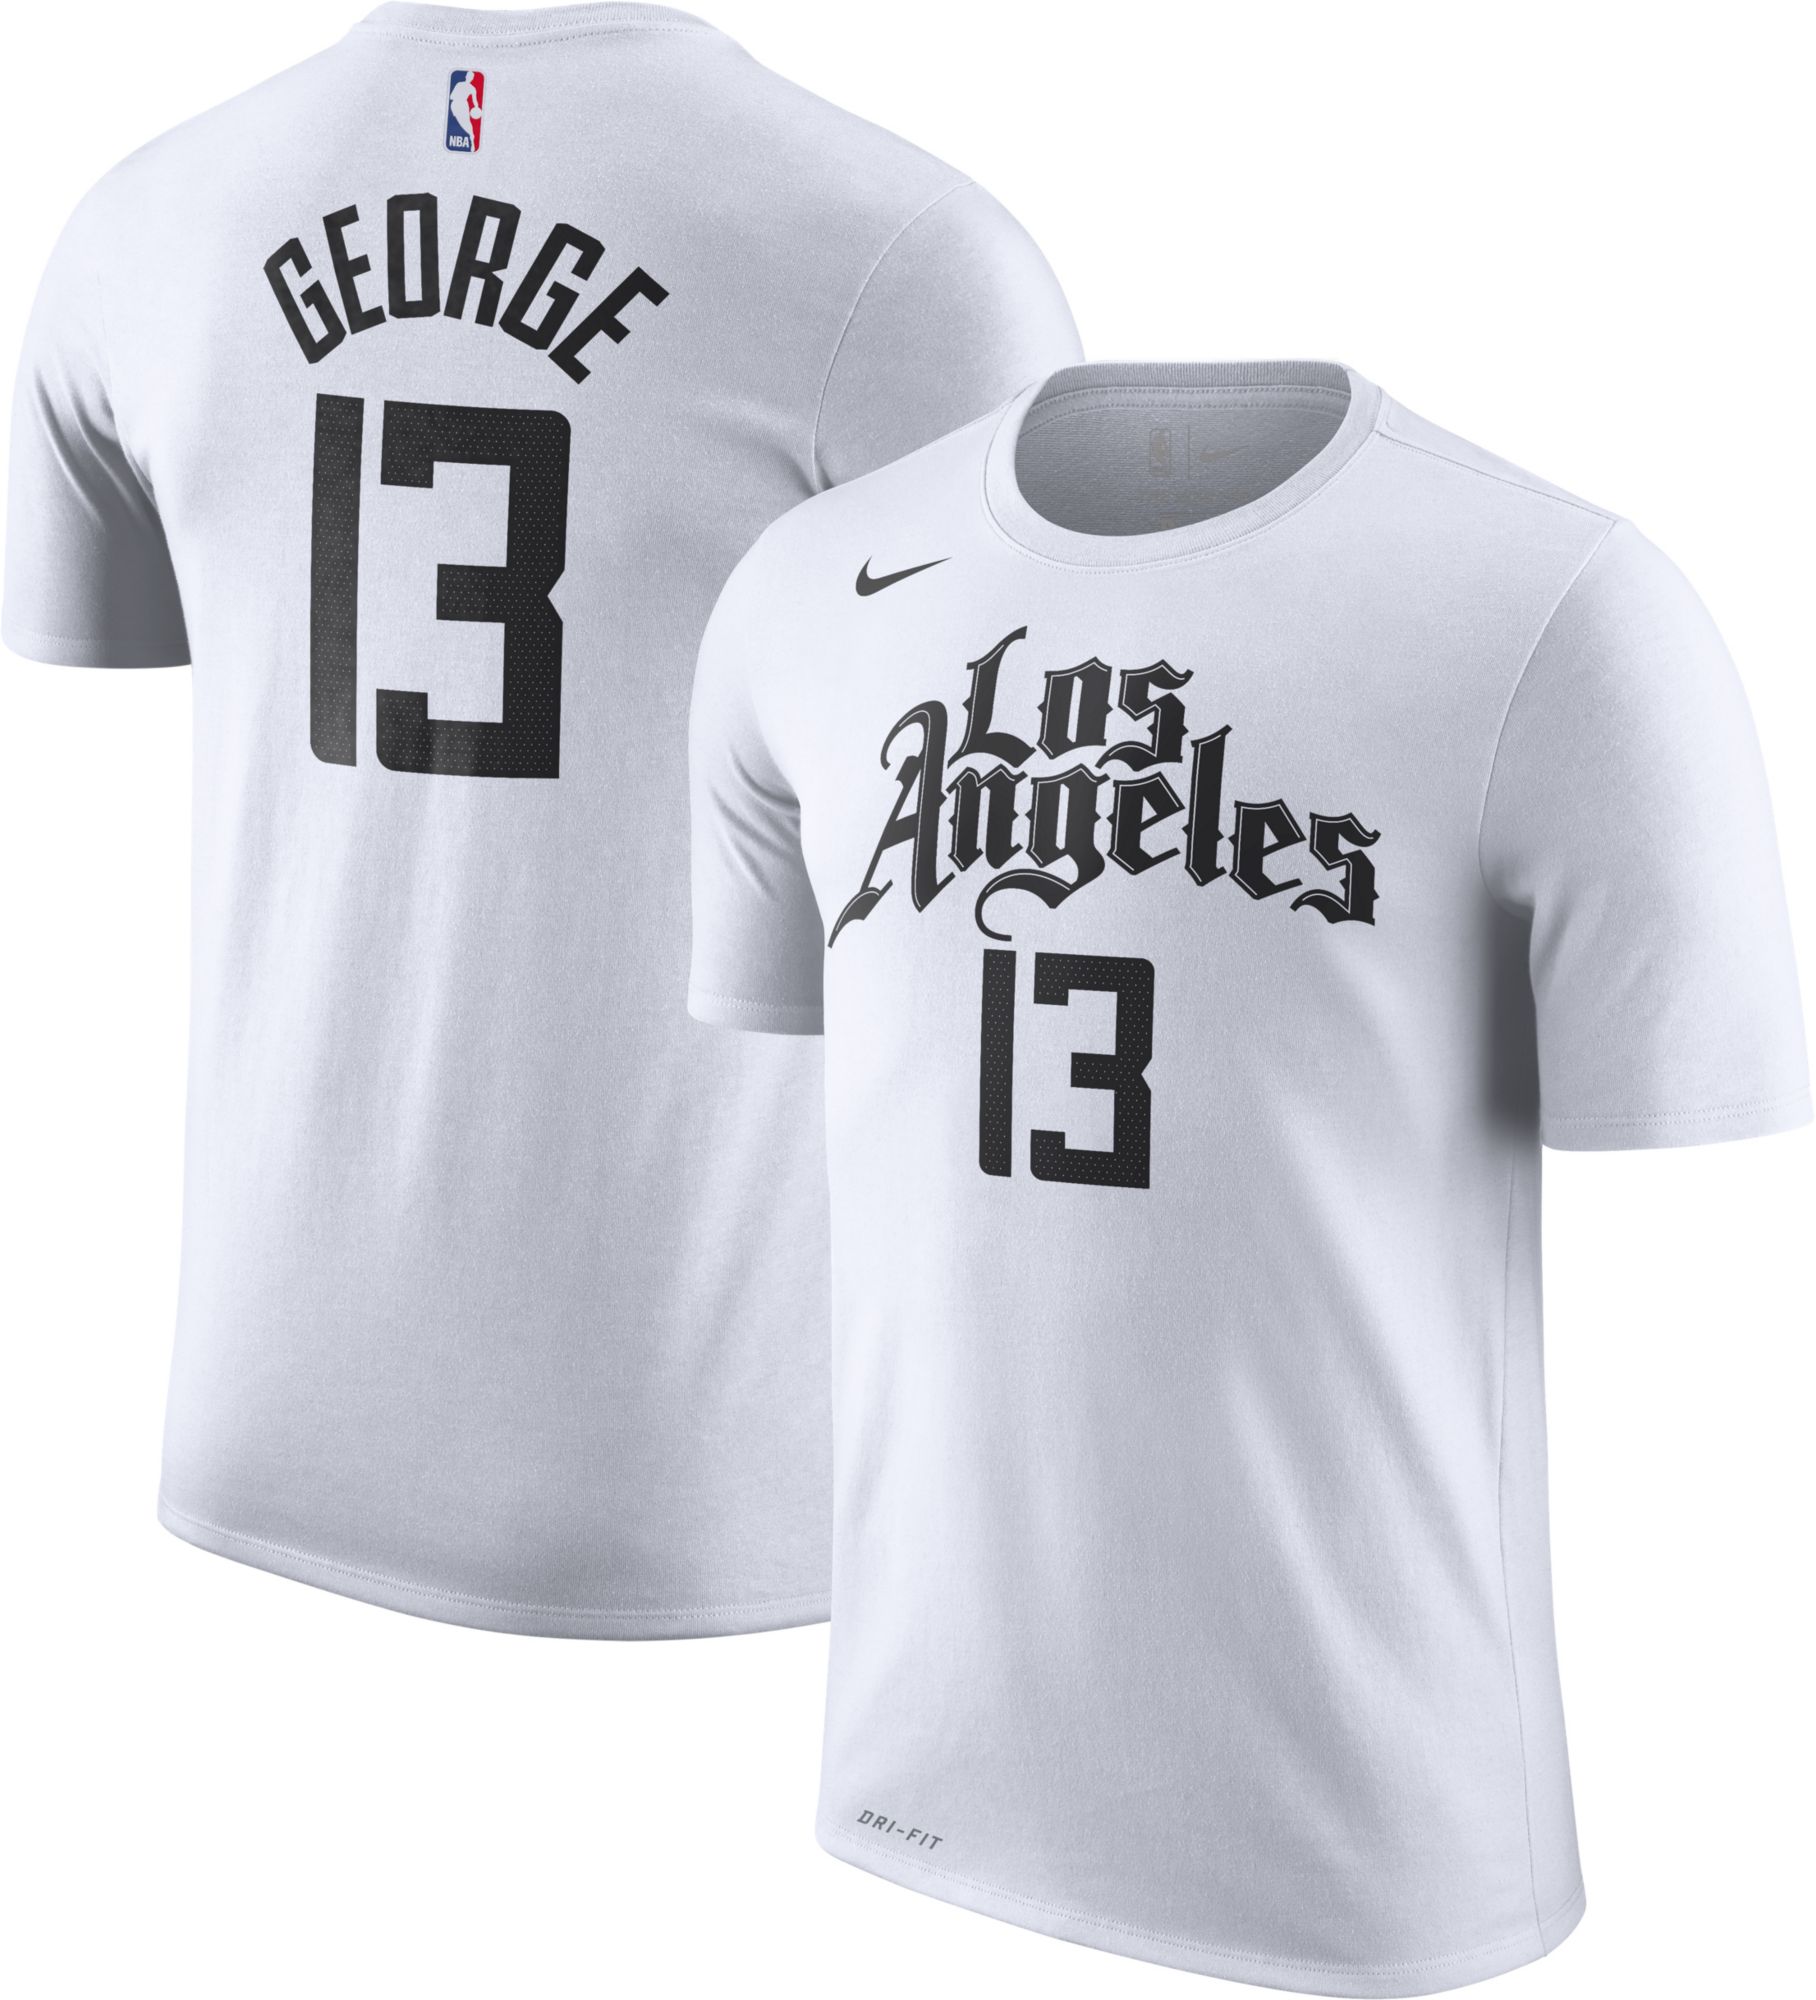 paul george clippers jersey white